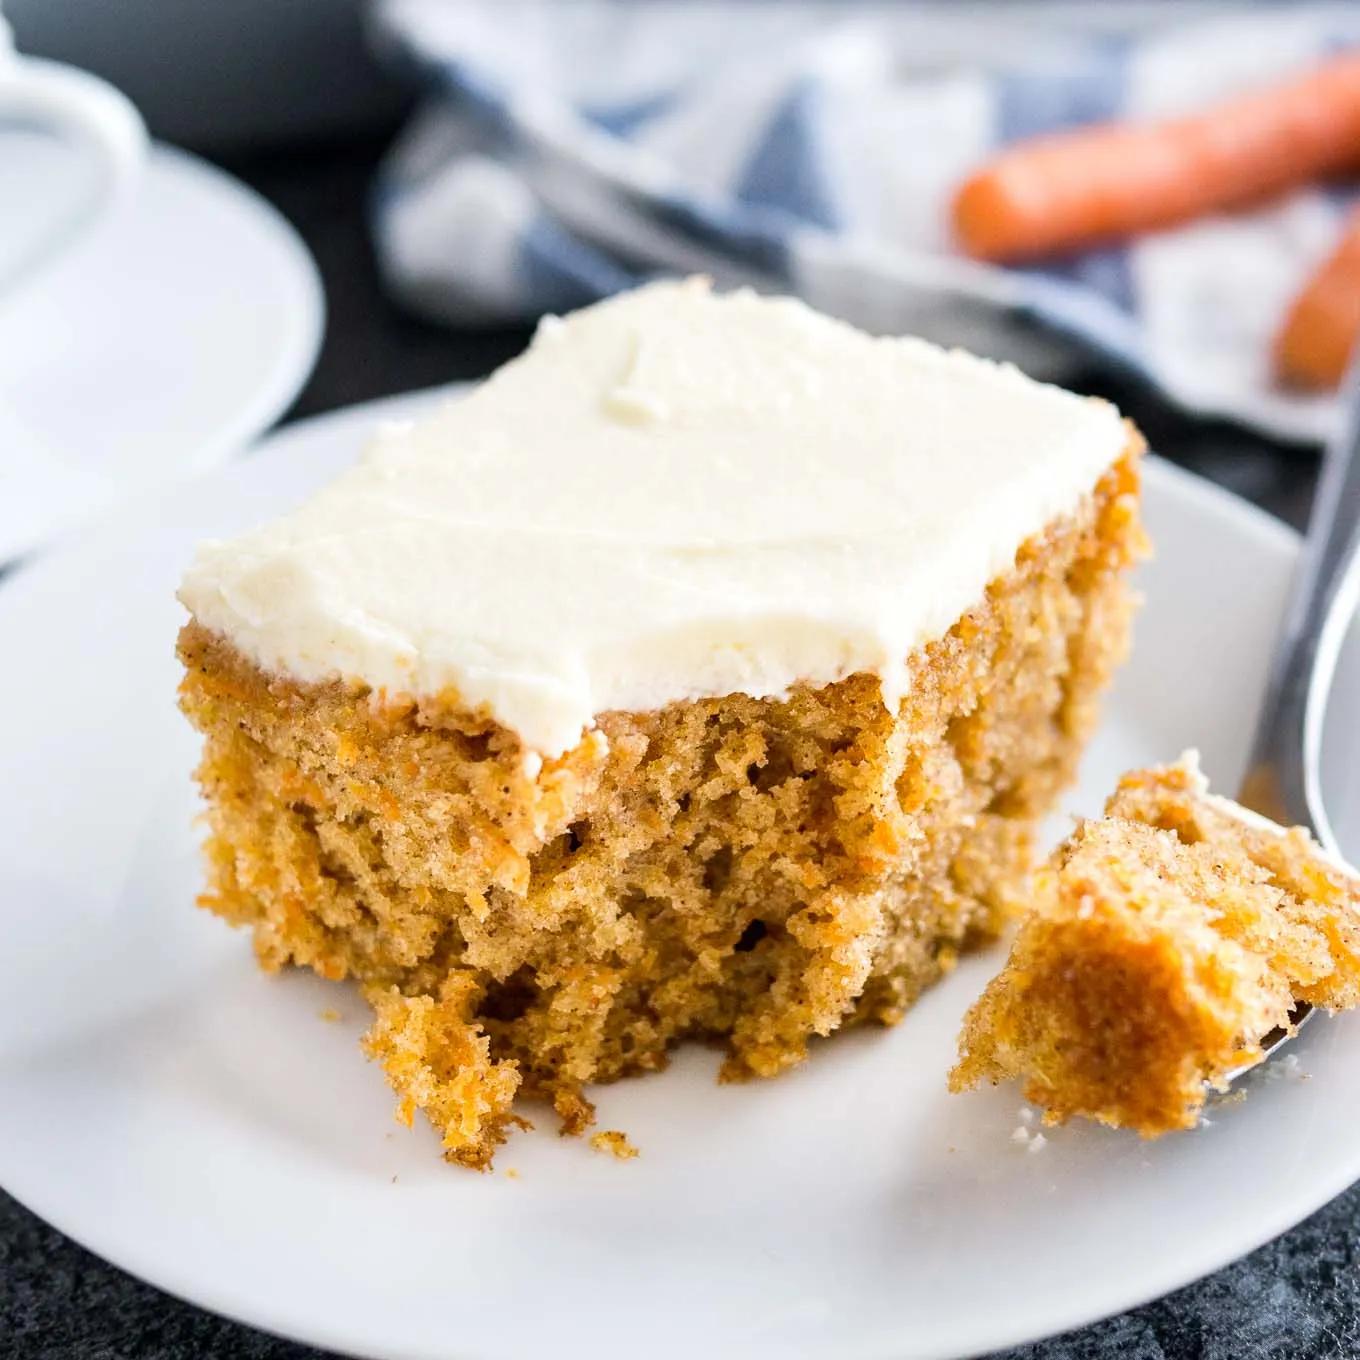 Easy Carrot Cake Recipe with Cream Cheese Frosting (Nut-free)